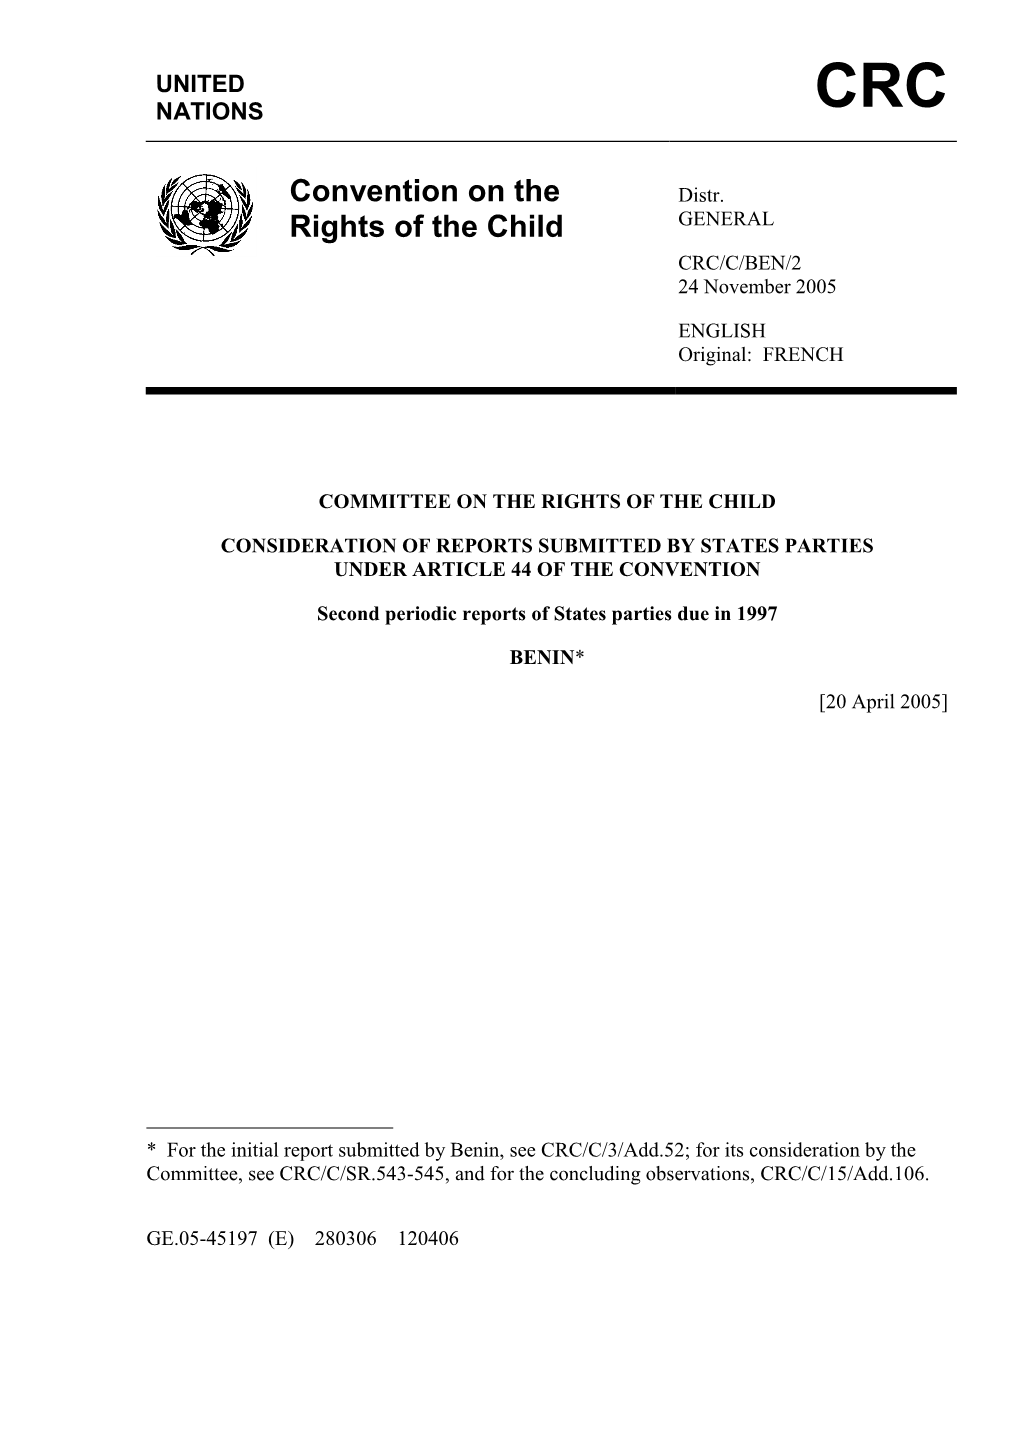 CONVENTION on the RIGHTS of the CHILD (1998-2002) CRC/C/BEN/2 Page 3